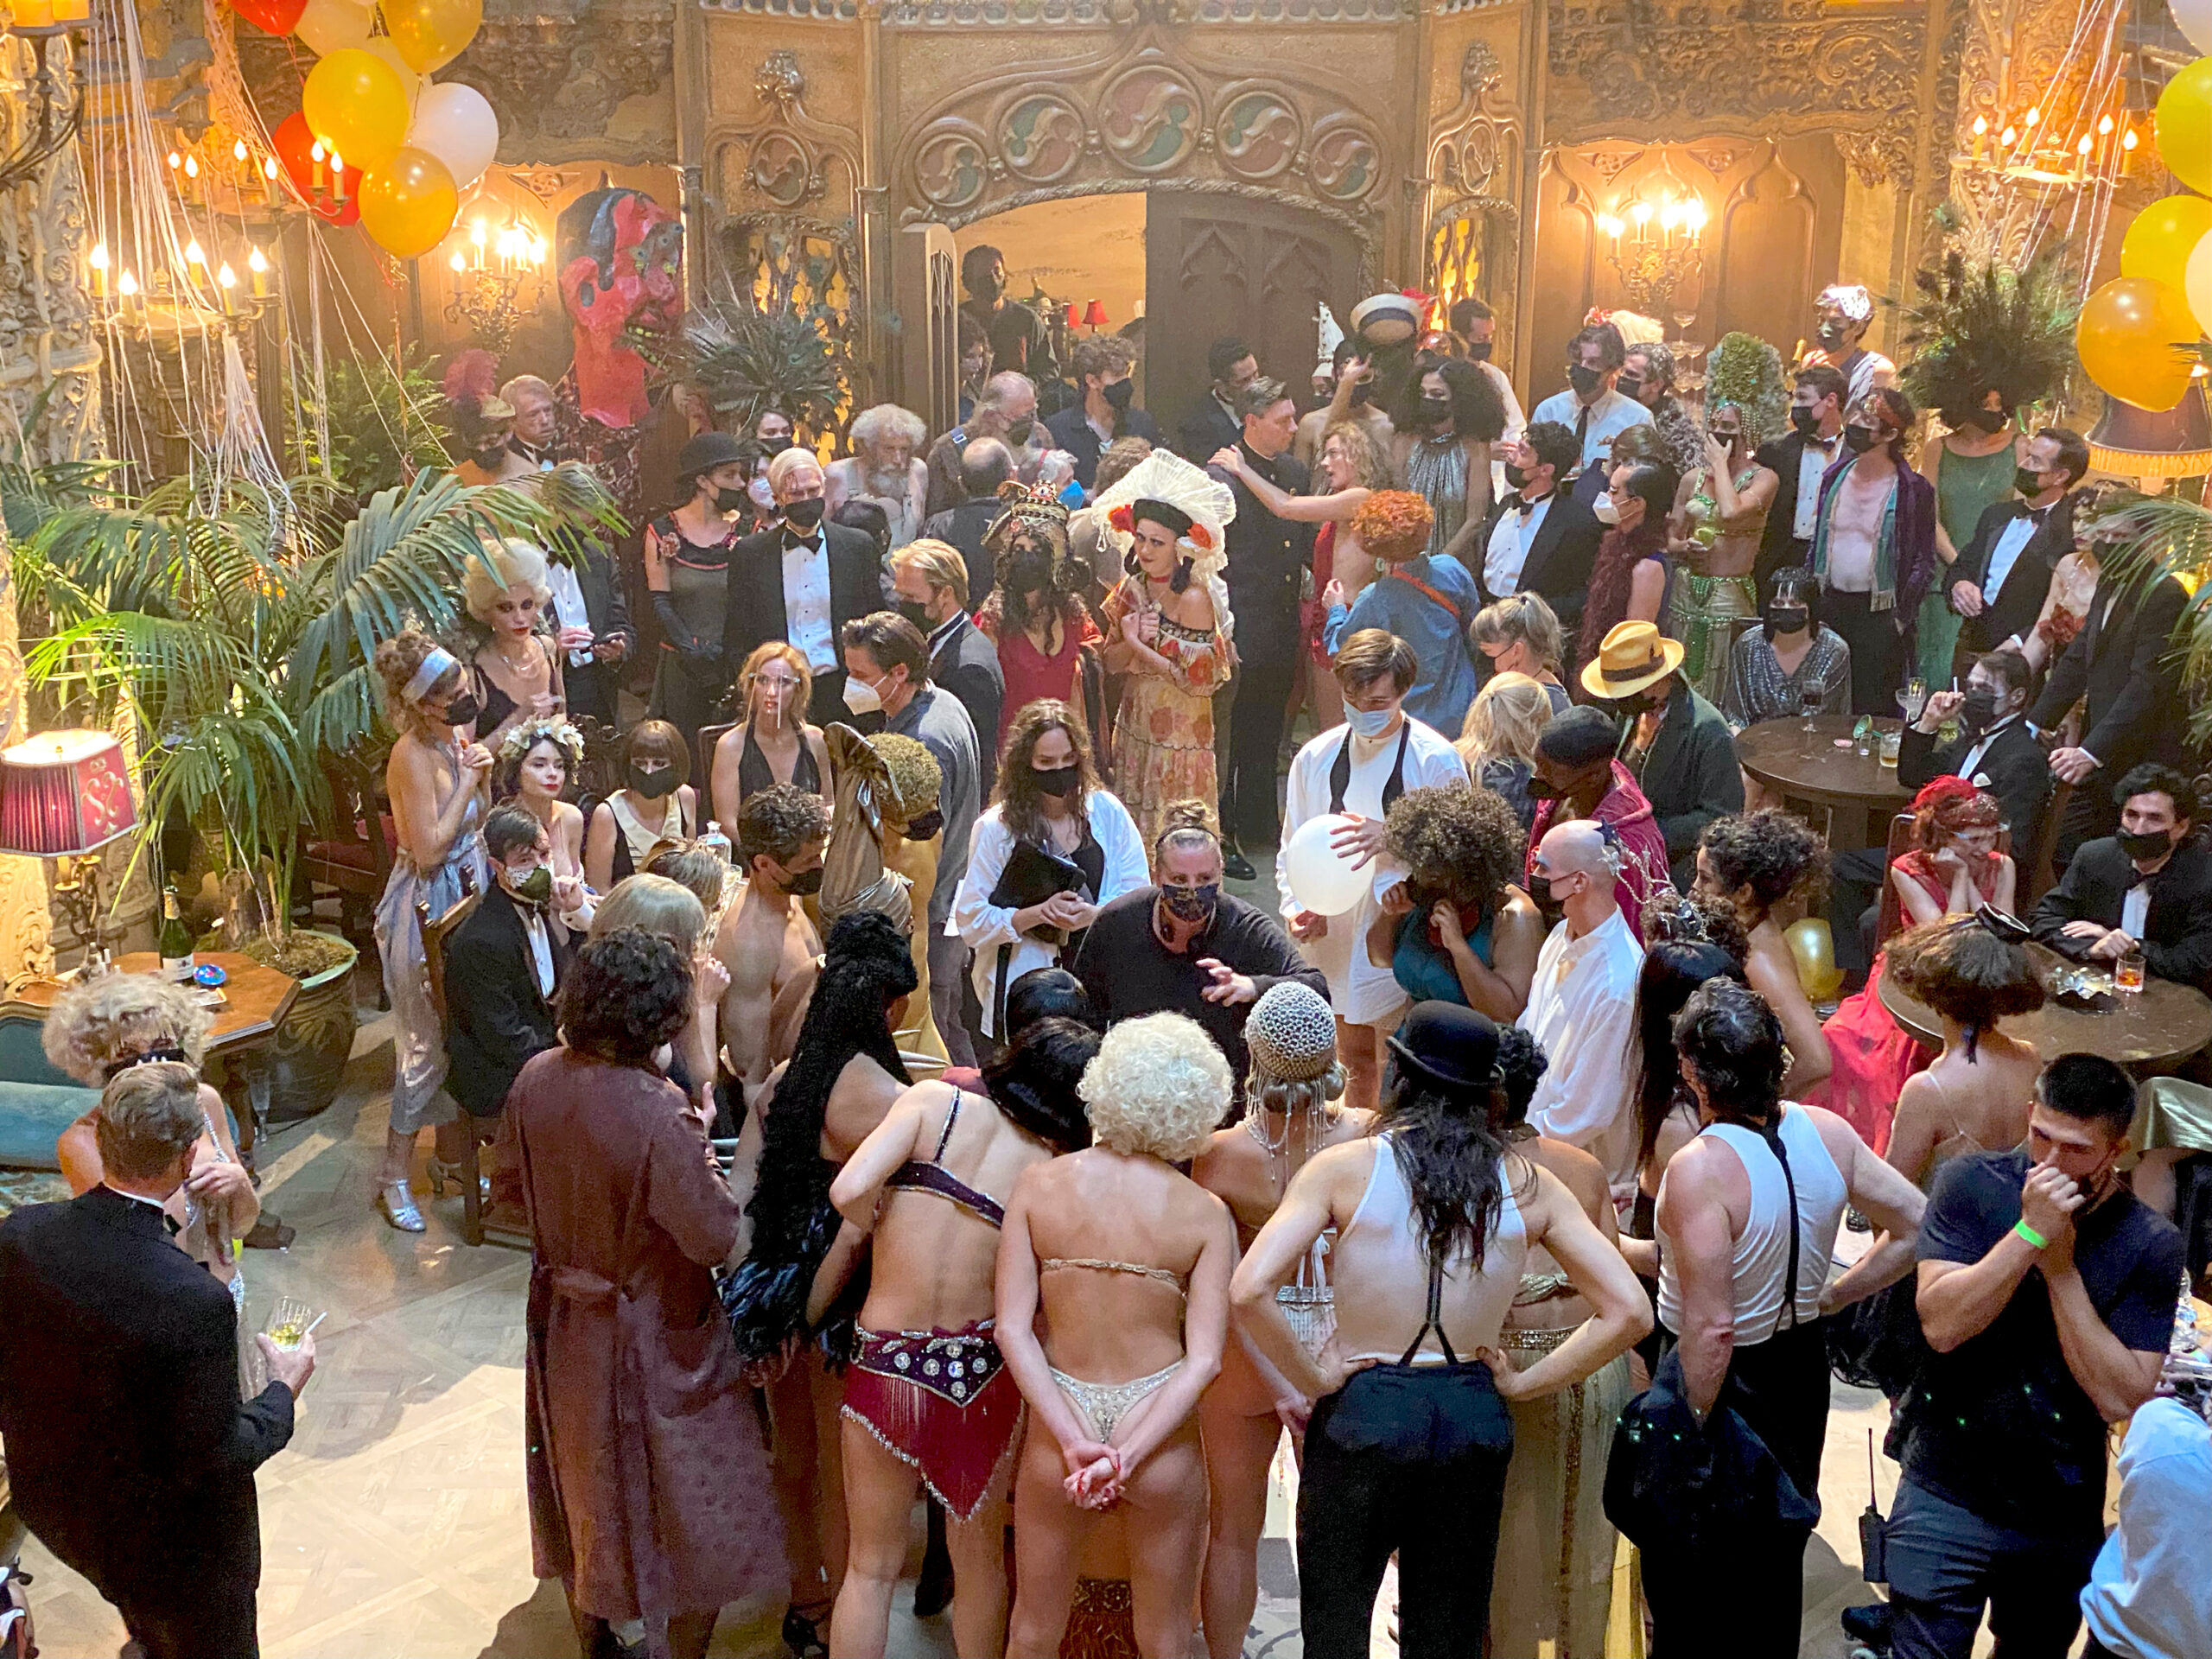 An aerial view of an opulent film set in between takes. Claire Elizabeth Ross and Mandy Moore both wear face masks as Moore speaks at the center of a circle of costumed performers. Several dozen actors and crew members are arrayed around the set.